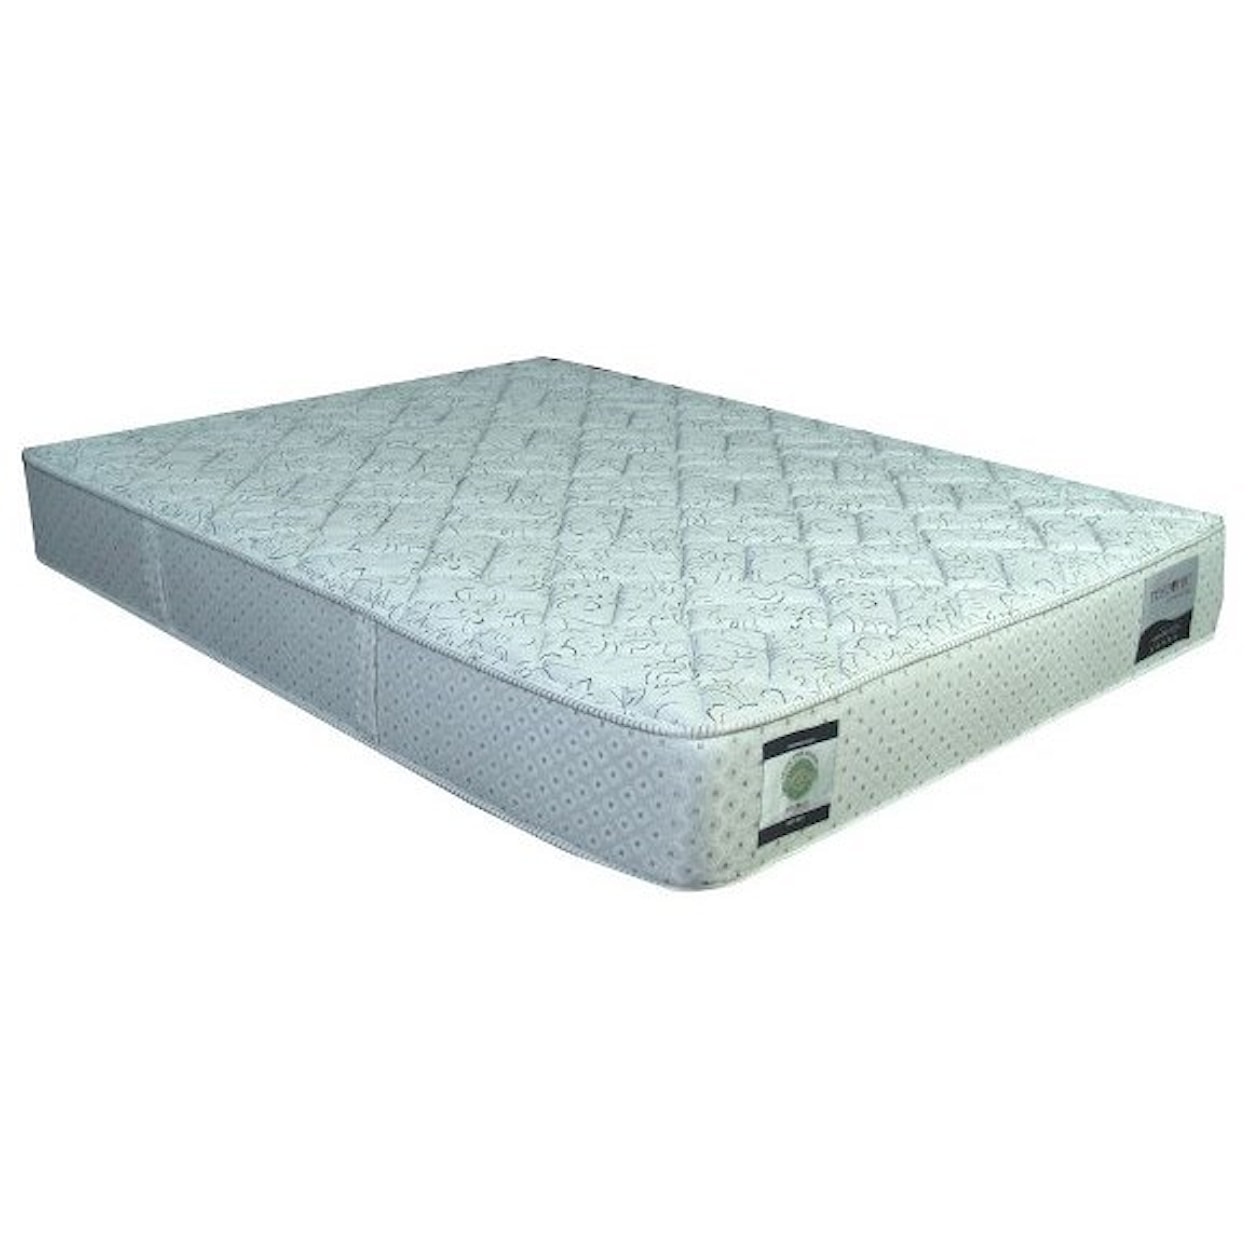 Restonic CC Linwood Firm Twin XL 12" Firm Two Sided Mattress